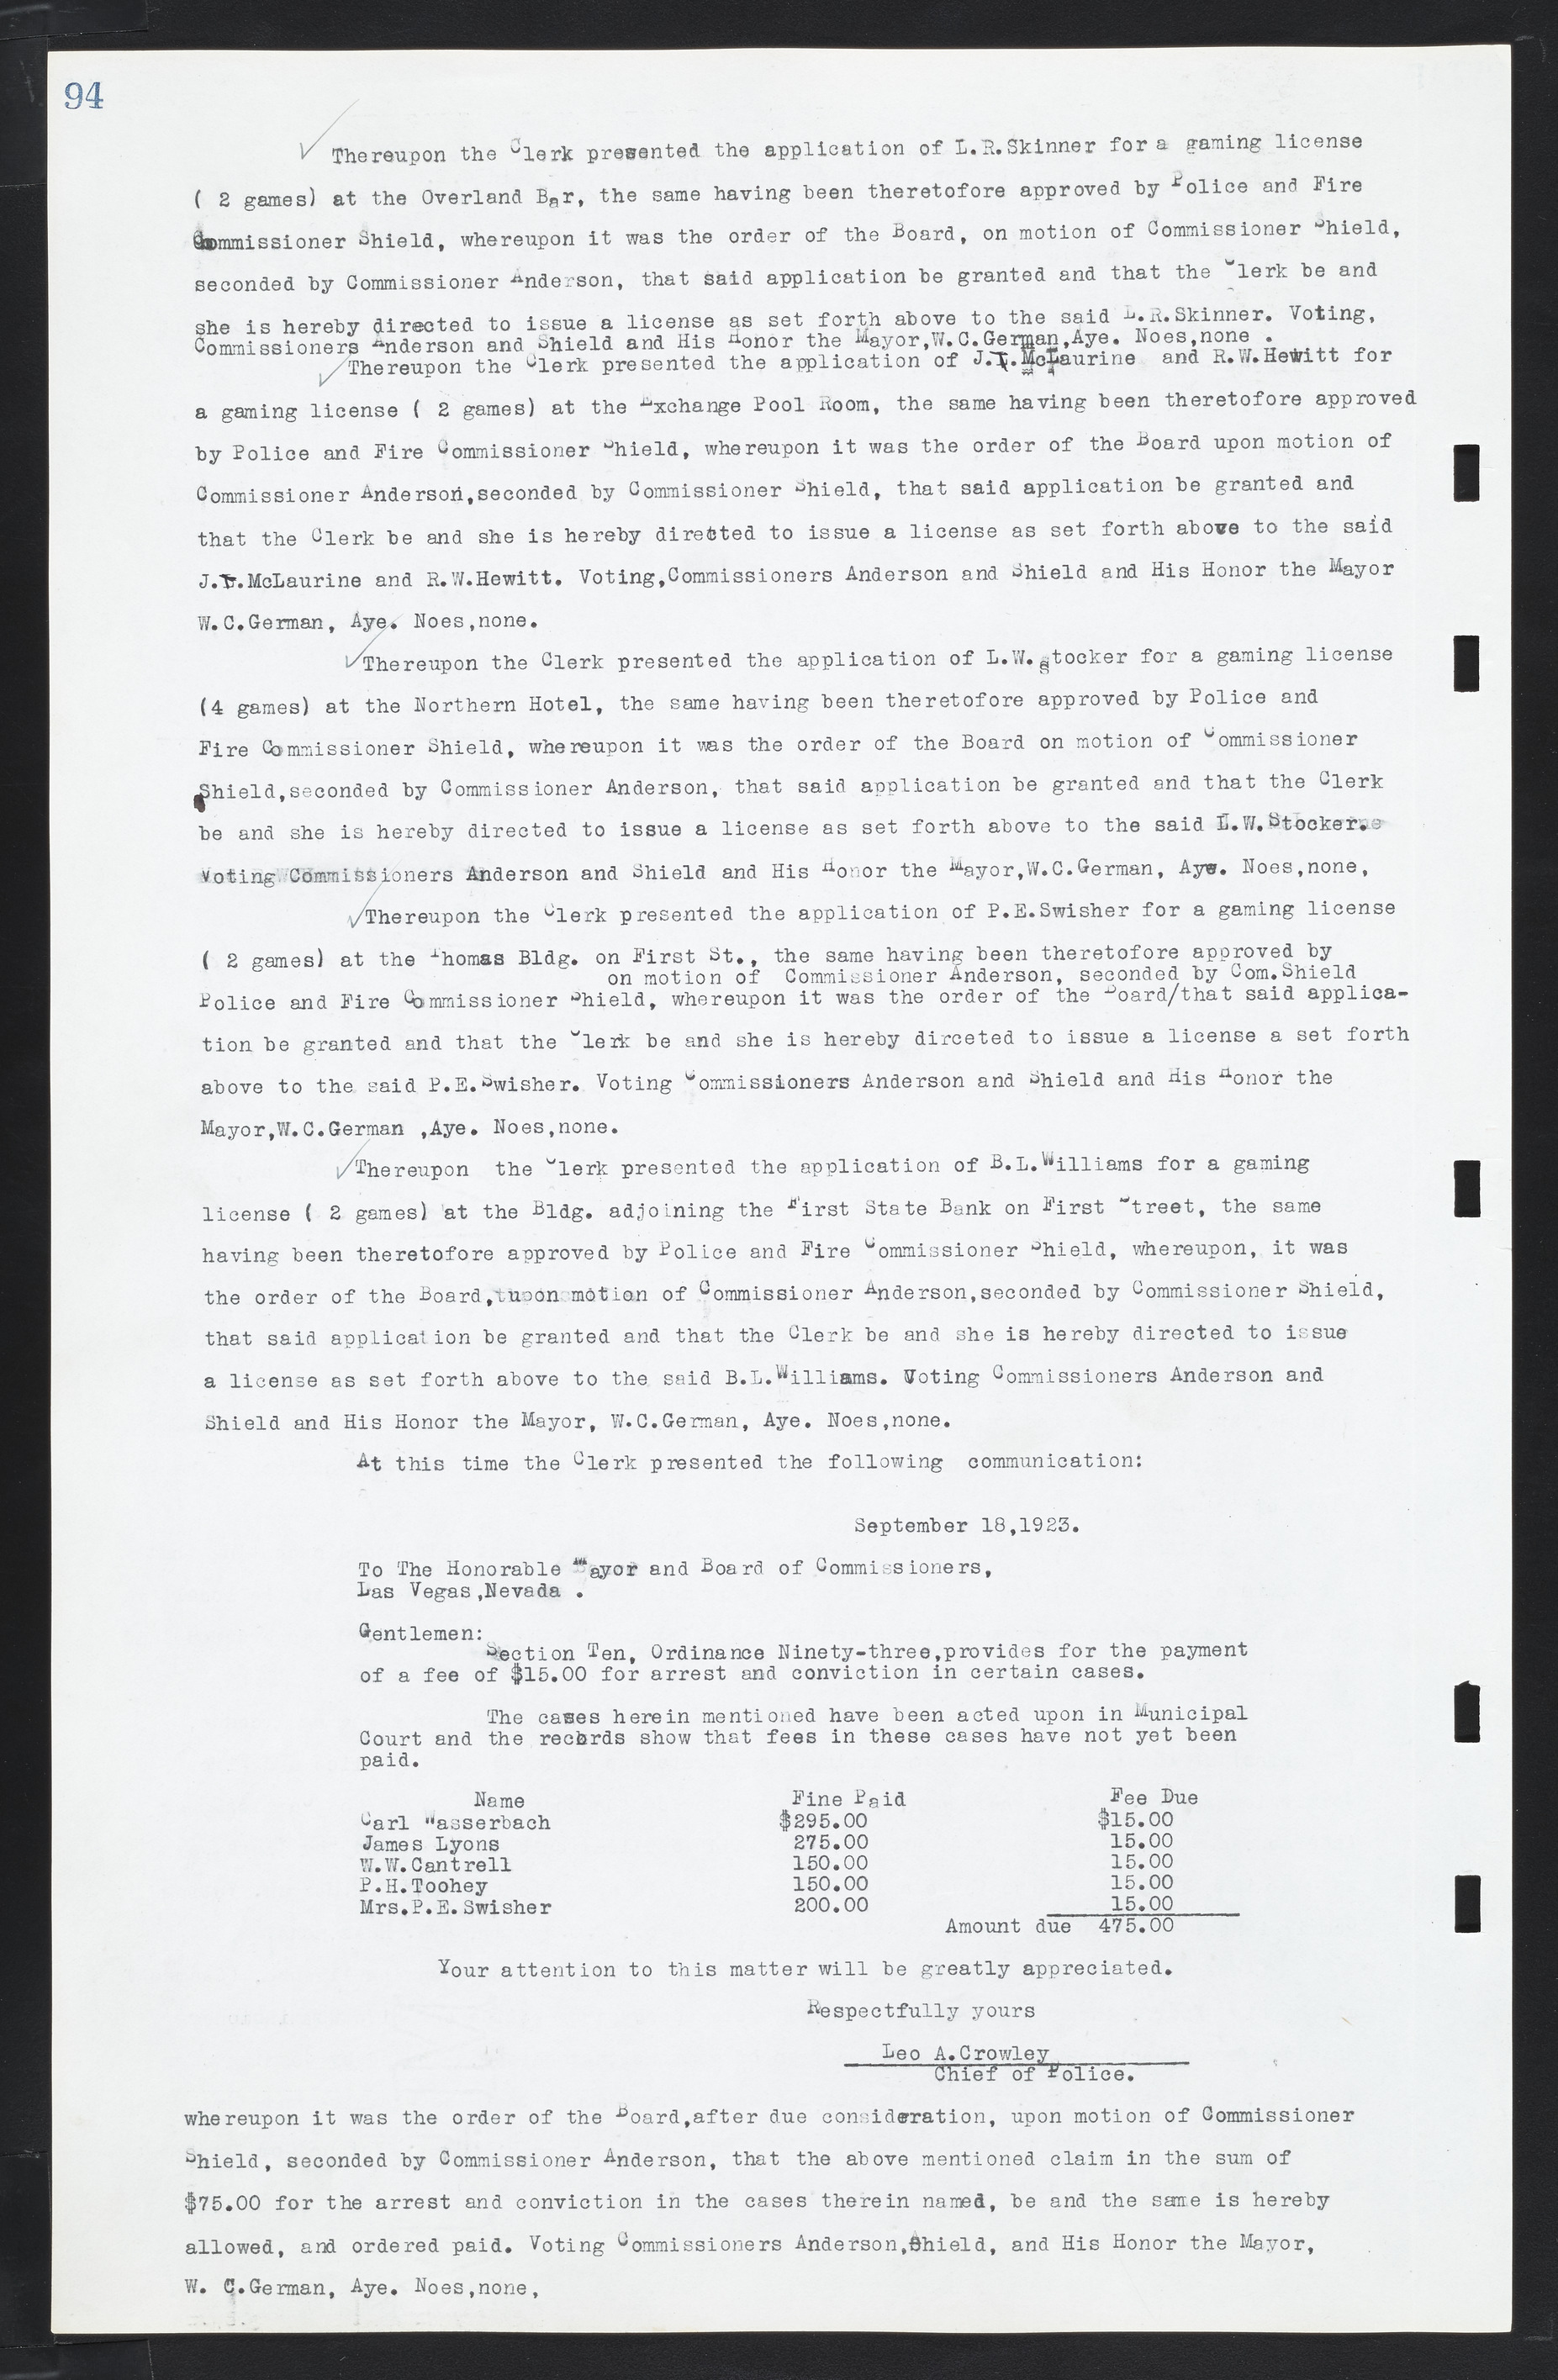 Las Vegas City Commission Minutes, March 1, 1922 to May 10, 1929, lvc000002-101